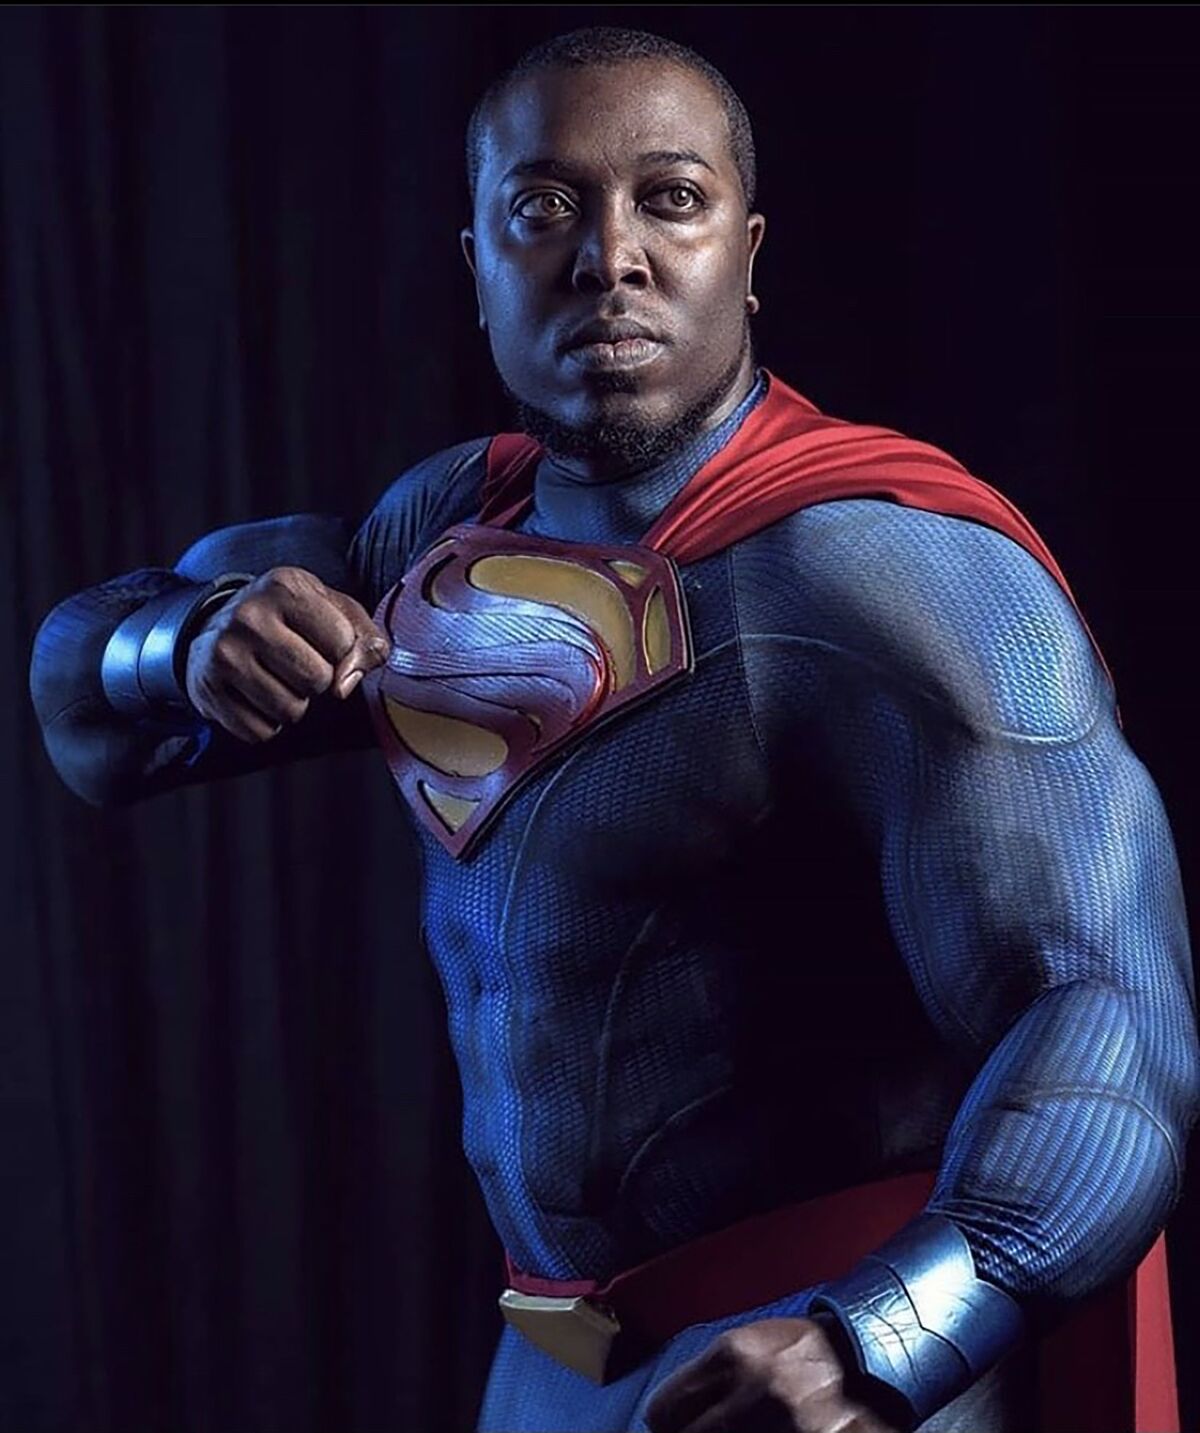 Charles Conley poses as Superman at the 2019 Facts Convention in Ghent, Belgium.